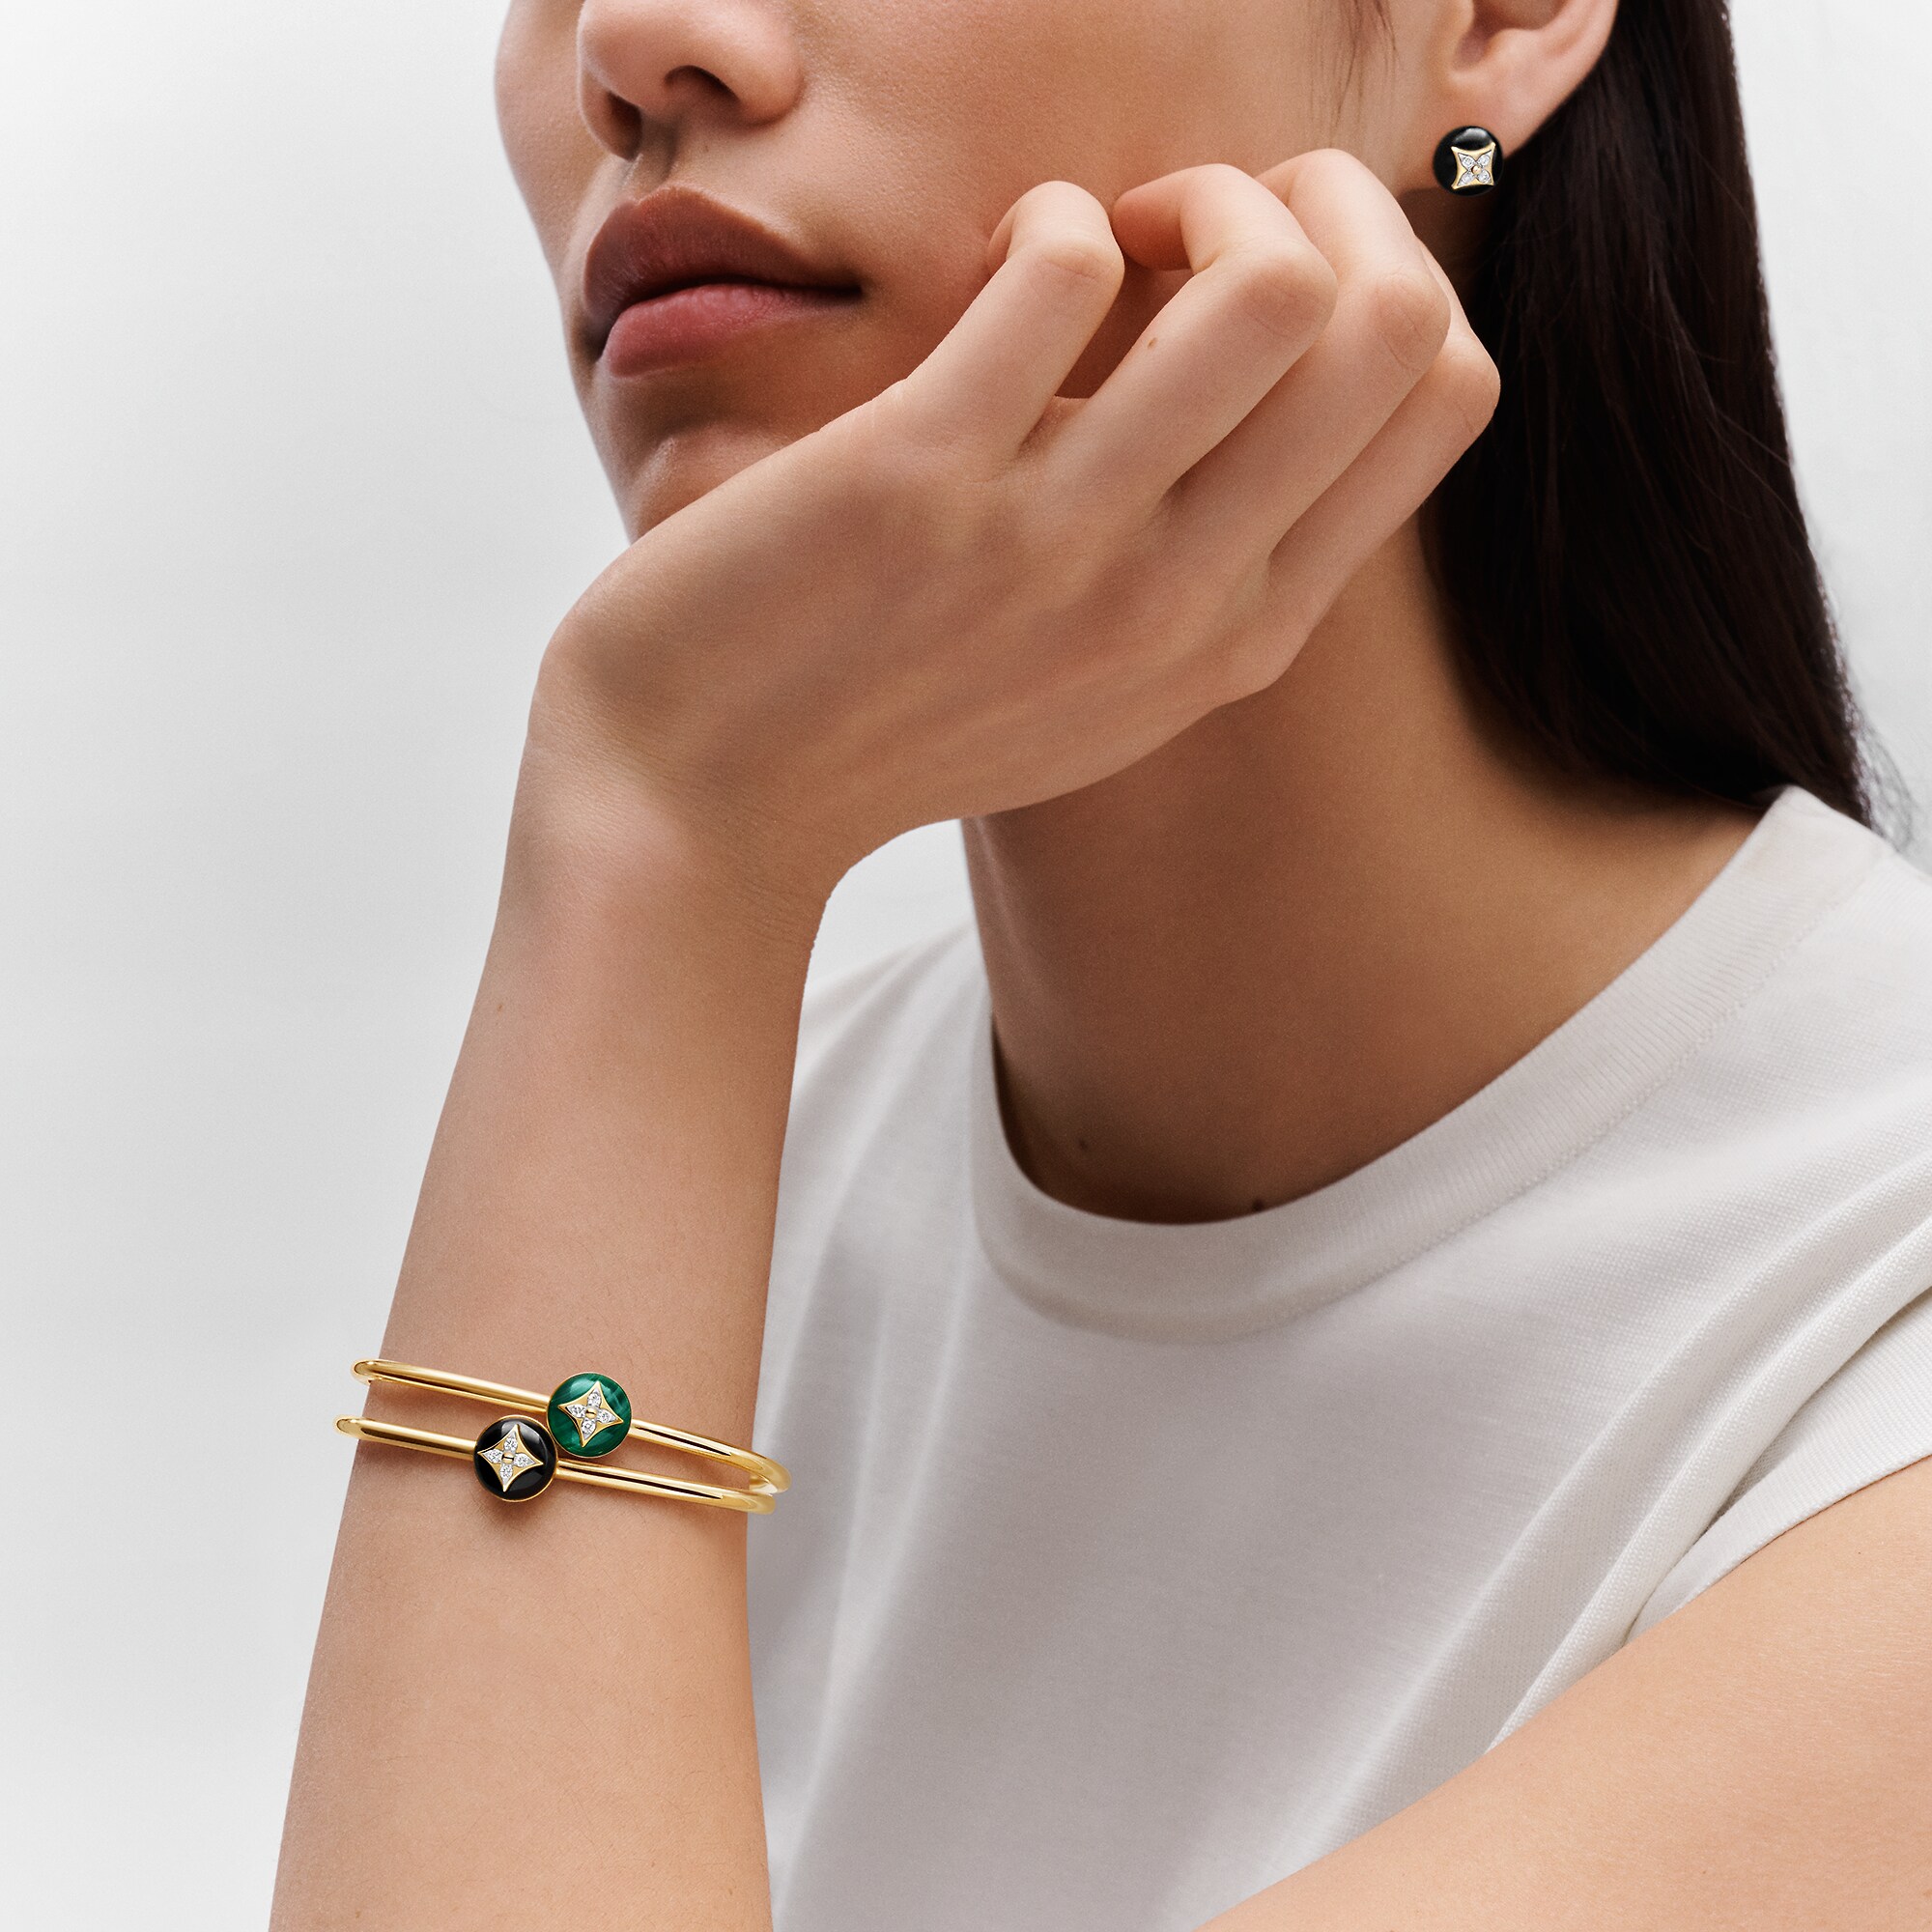 Louis Vuitton Color Blossom Open Bangle, Yellow Gold, White Gold, Malachite And Diamonds – Jewelry – Categories Q95879